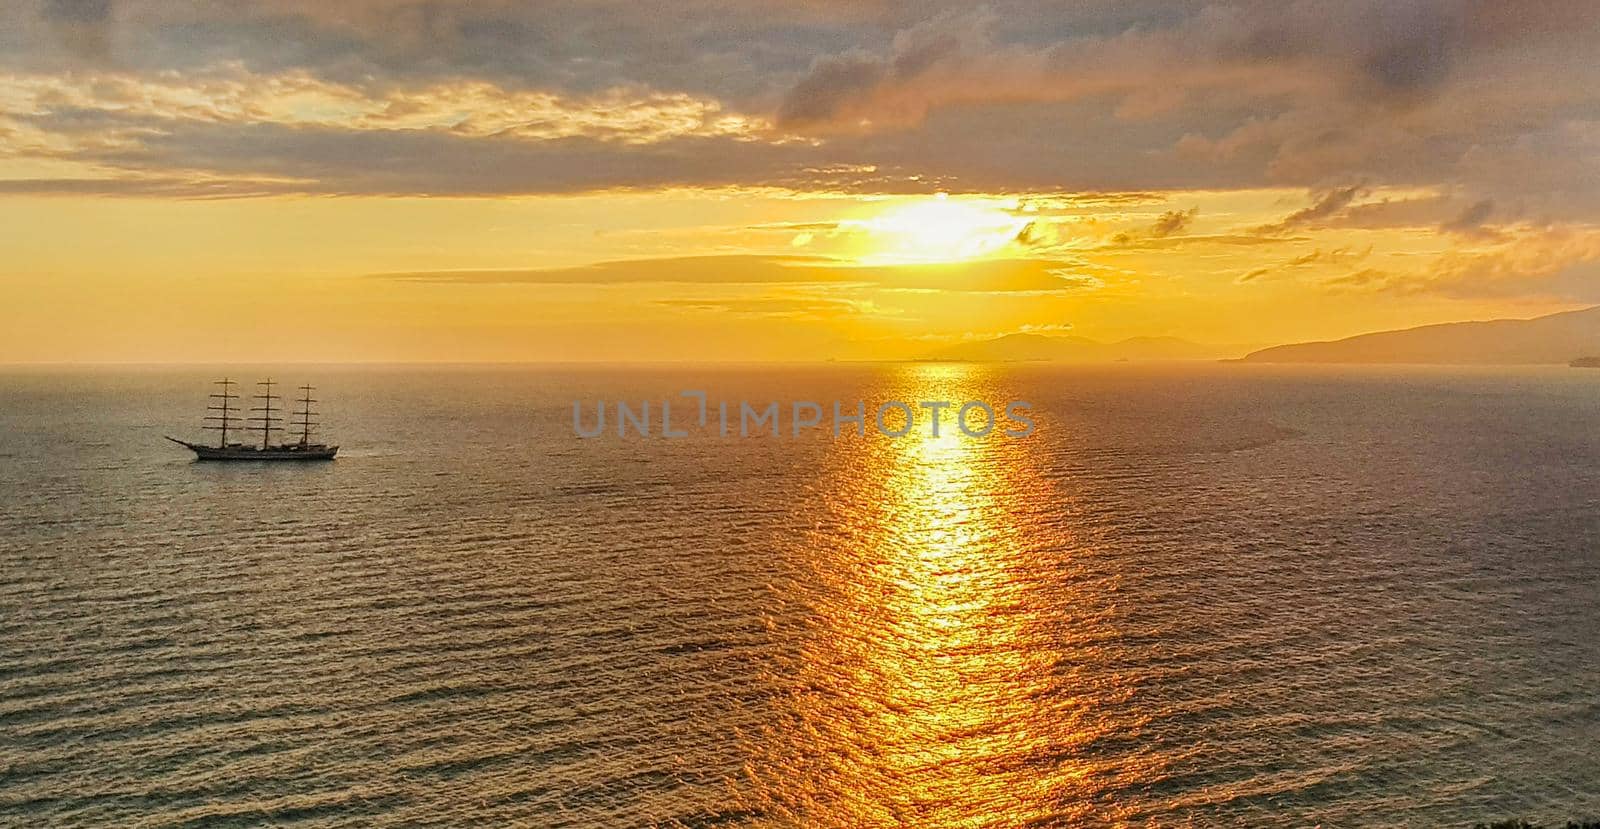 Romantic golden sunset on the sea with a yacht against the background of mountains and orange clouds, a calm scene of a warm peaceful evening.